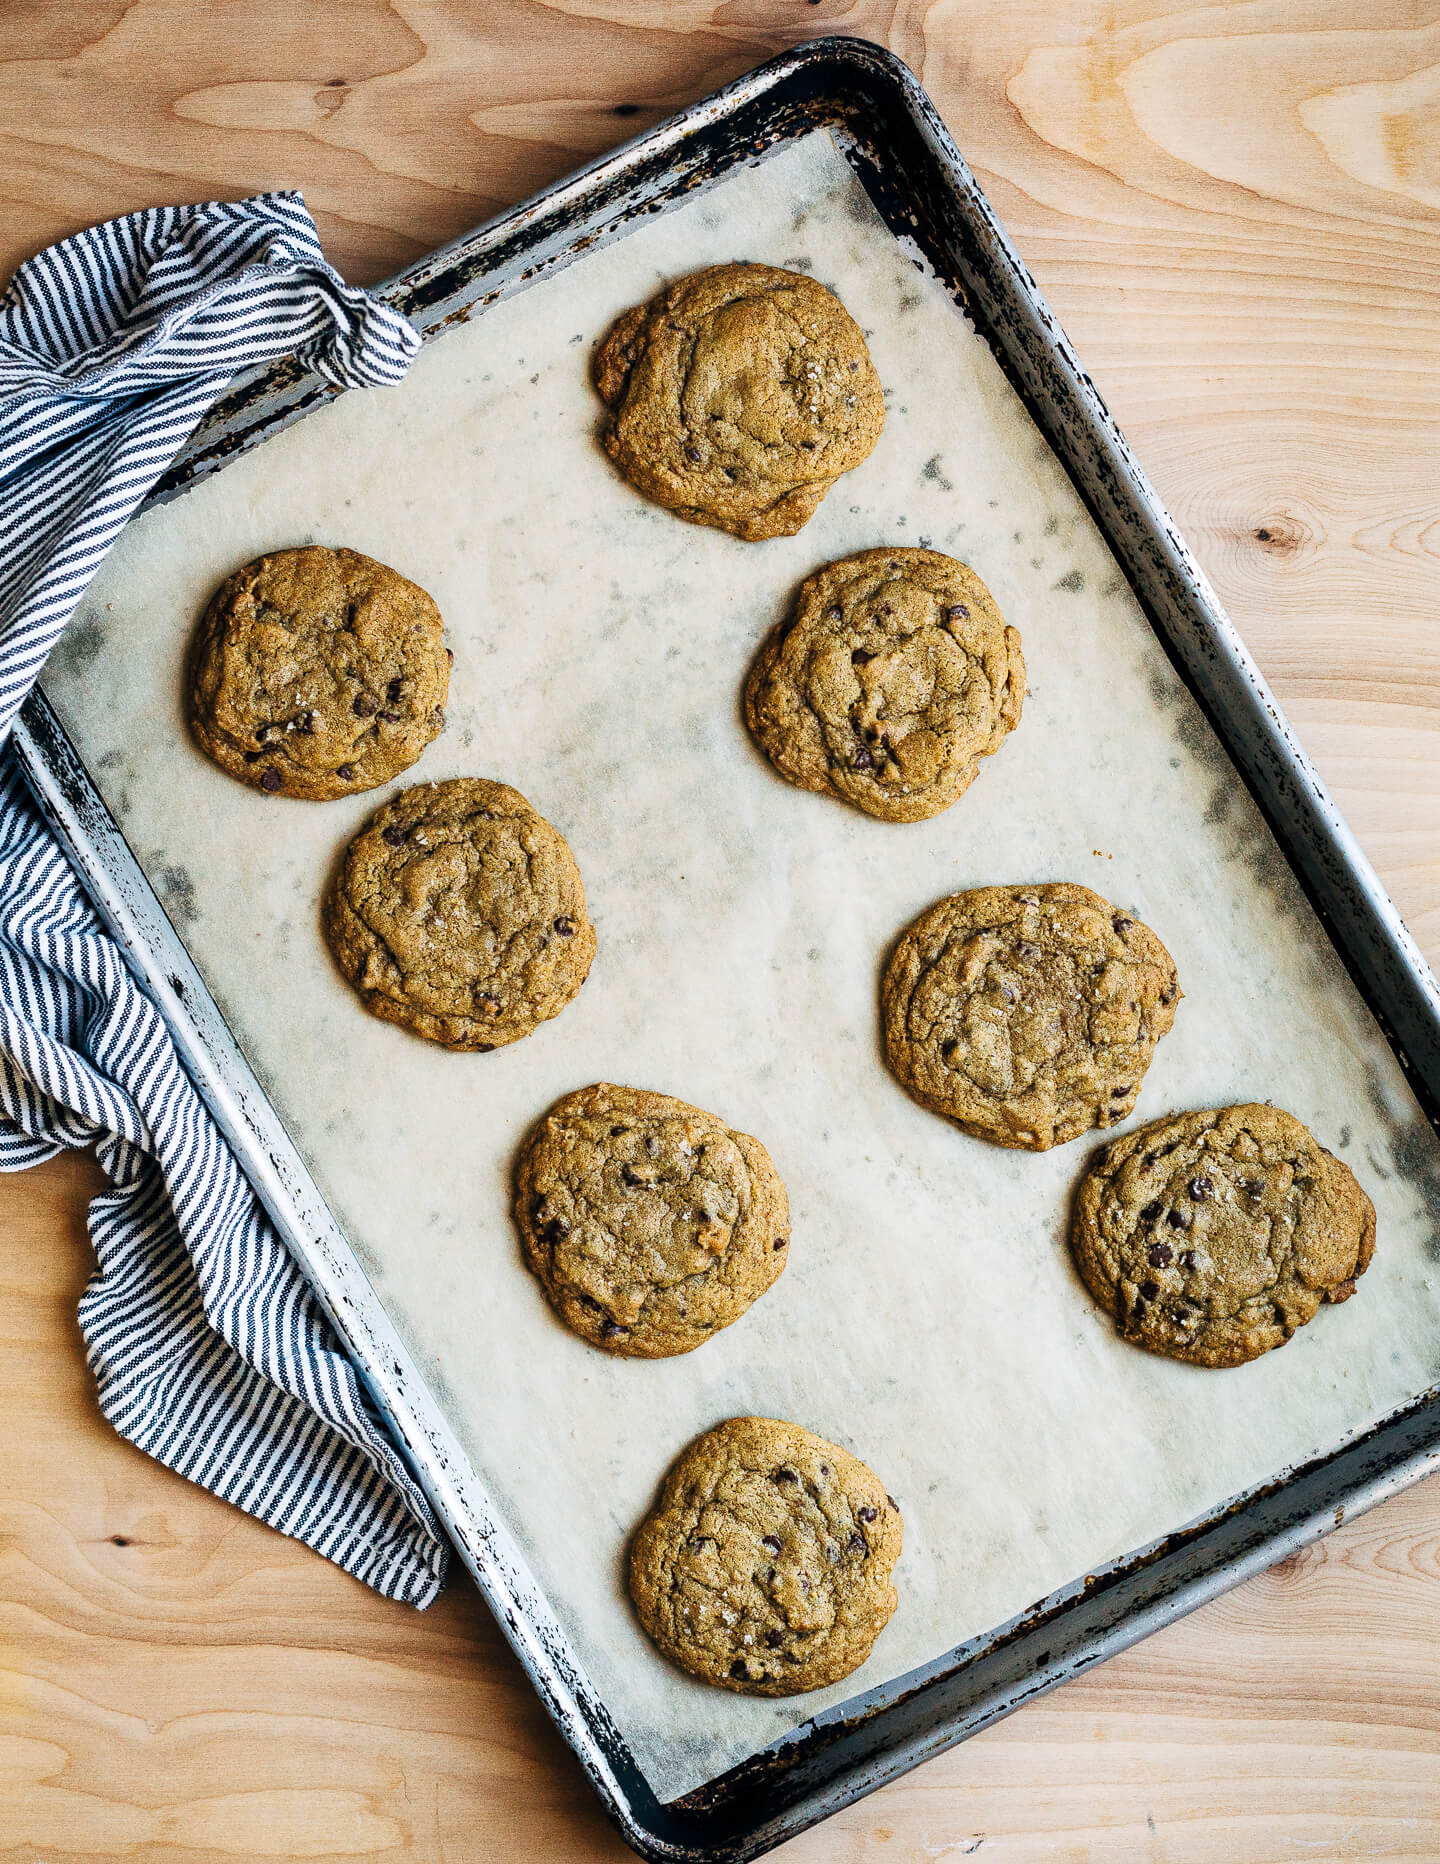 These nutty rye chocolate chip cookies are made with fragrant toasted rye flour and a few extra drizzles of molasses.